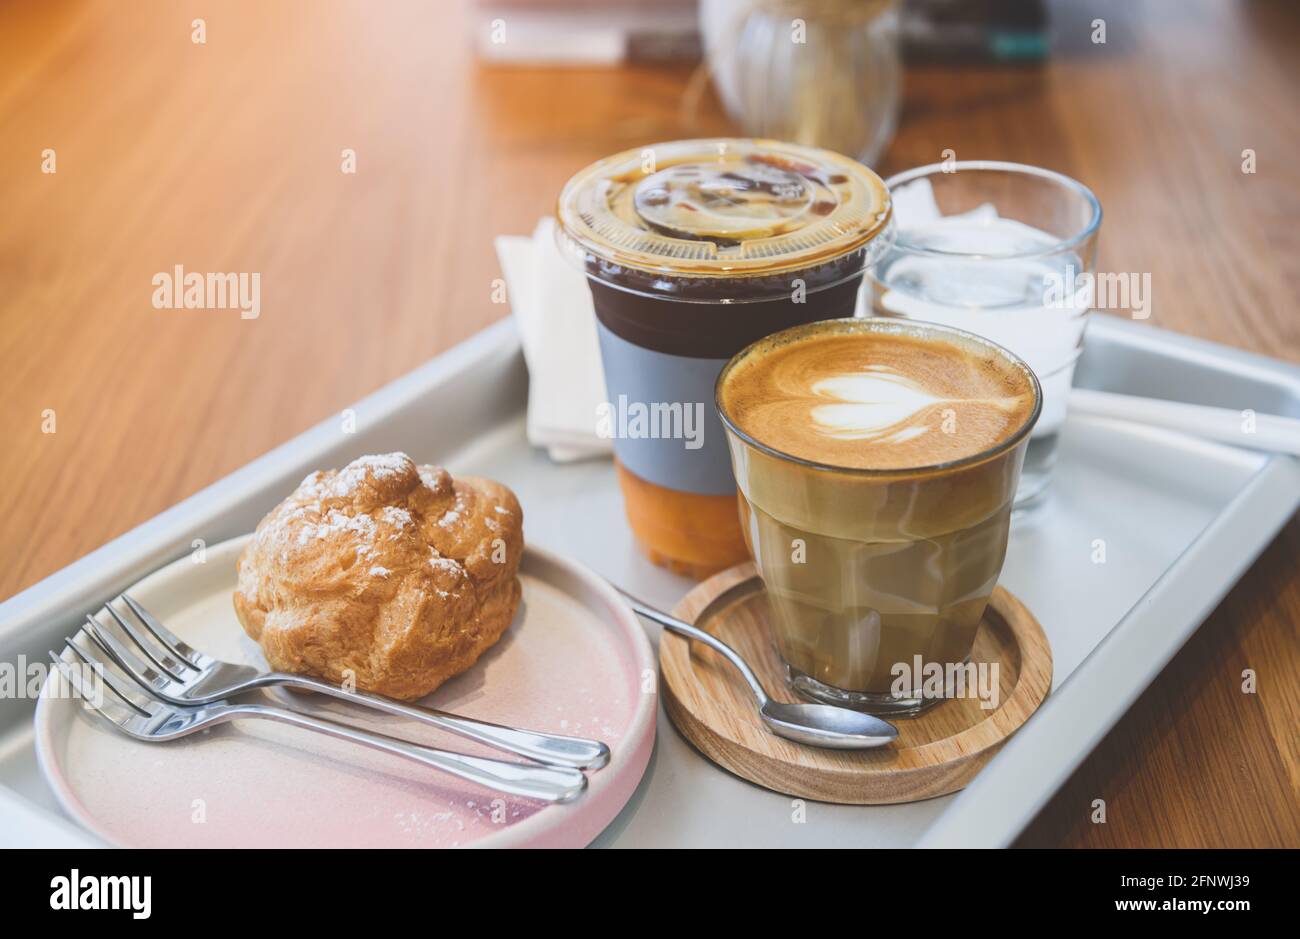 Coffee order surve set in the tray on the wooden table with morning lighting. Stock Photo